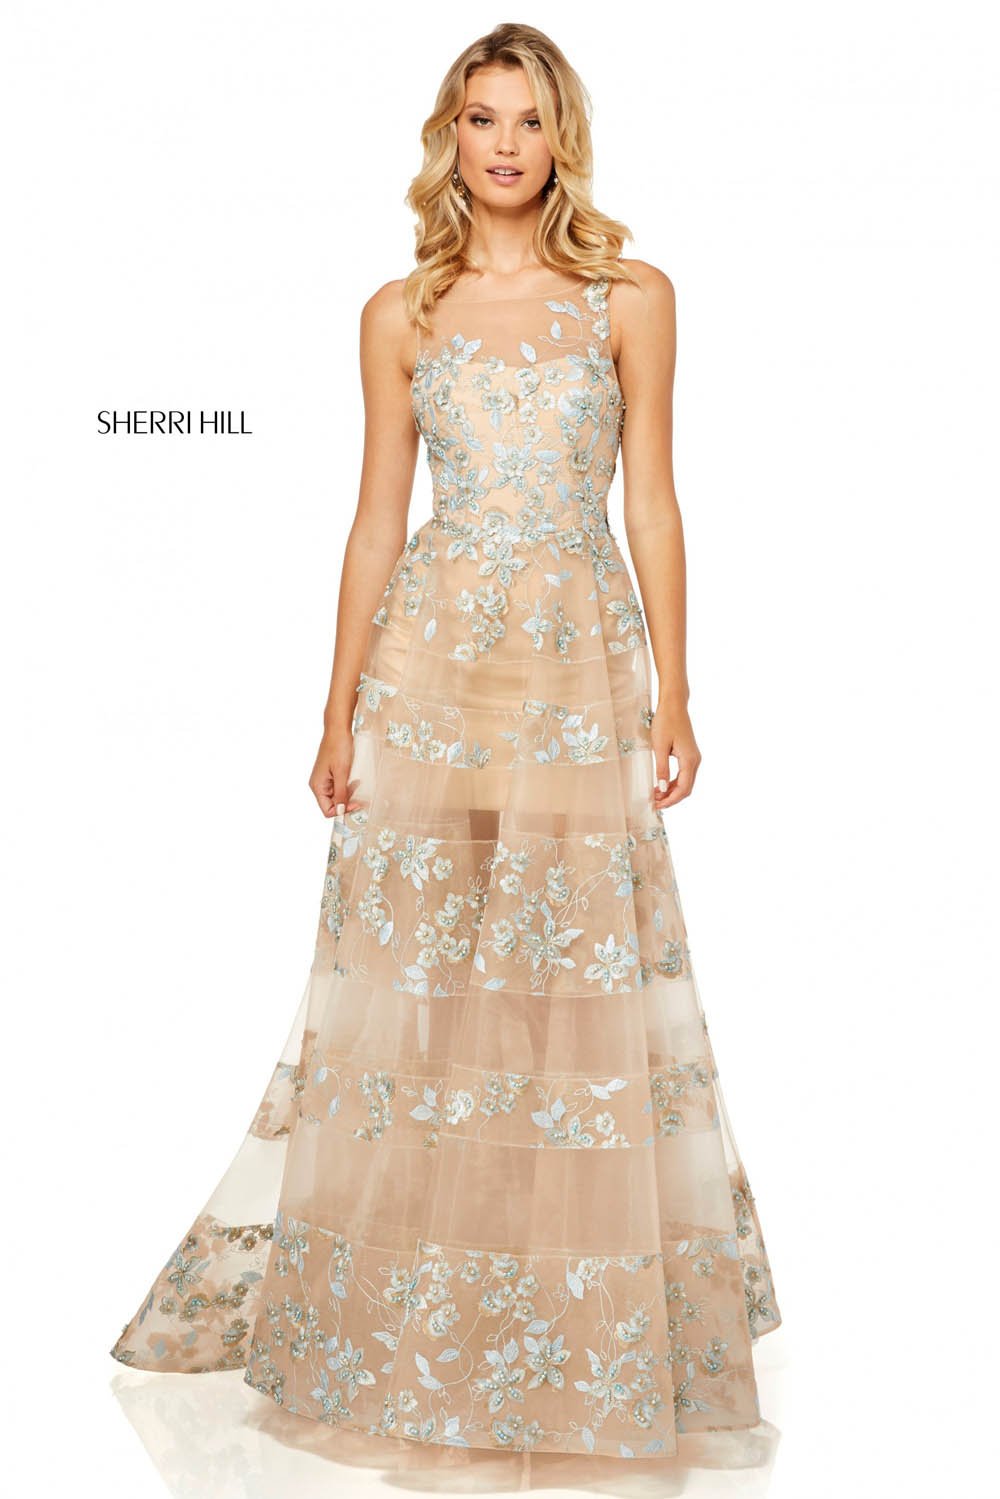 Sherri Hill 52352 dress images in these colors: Nude Light Blue.